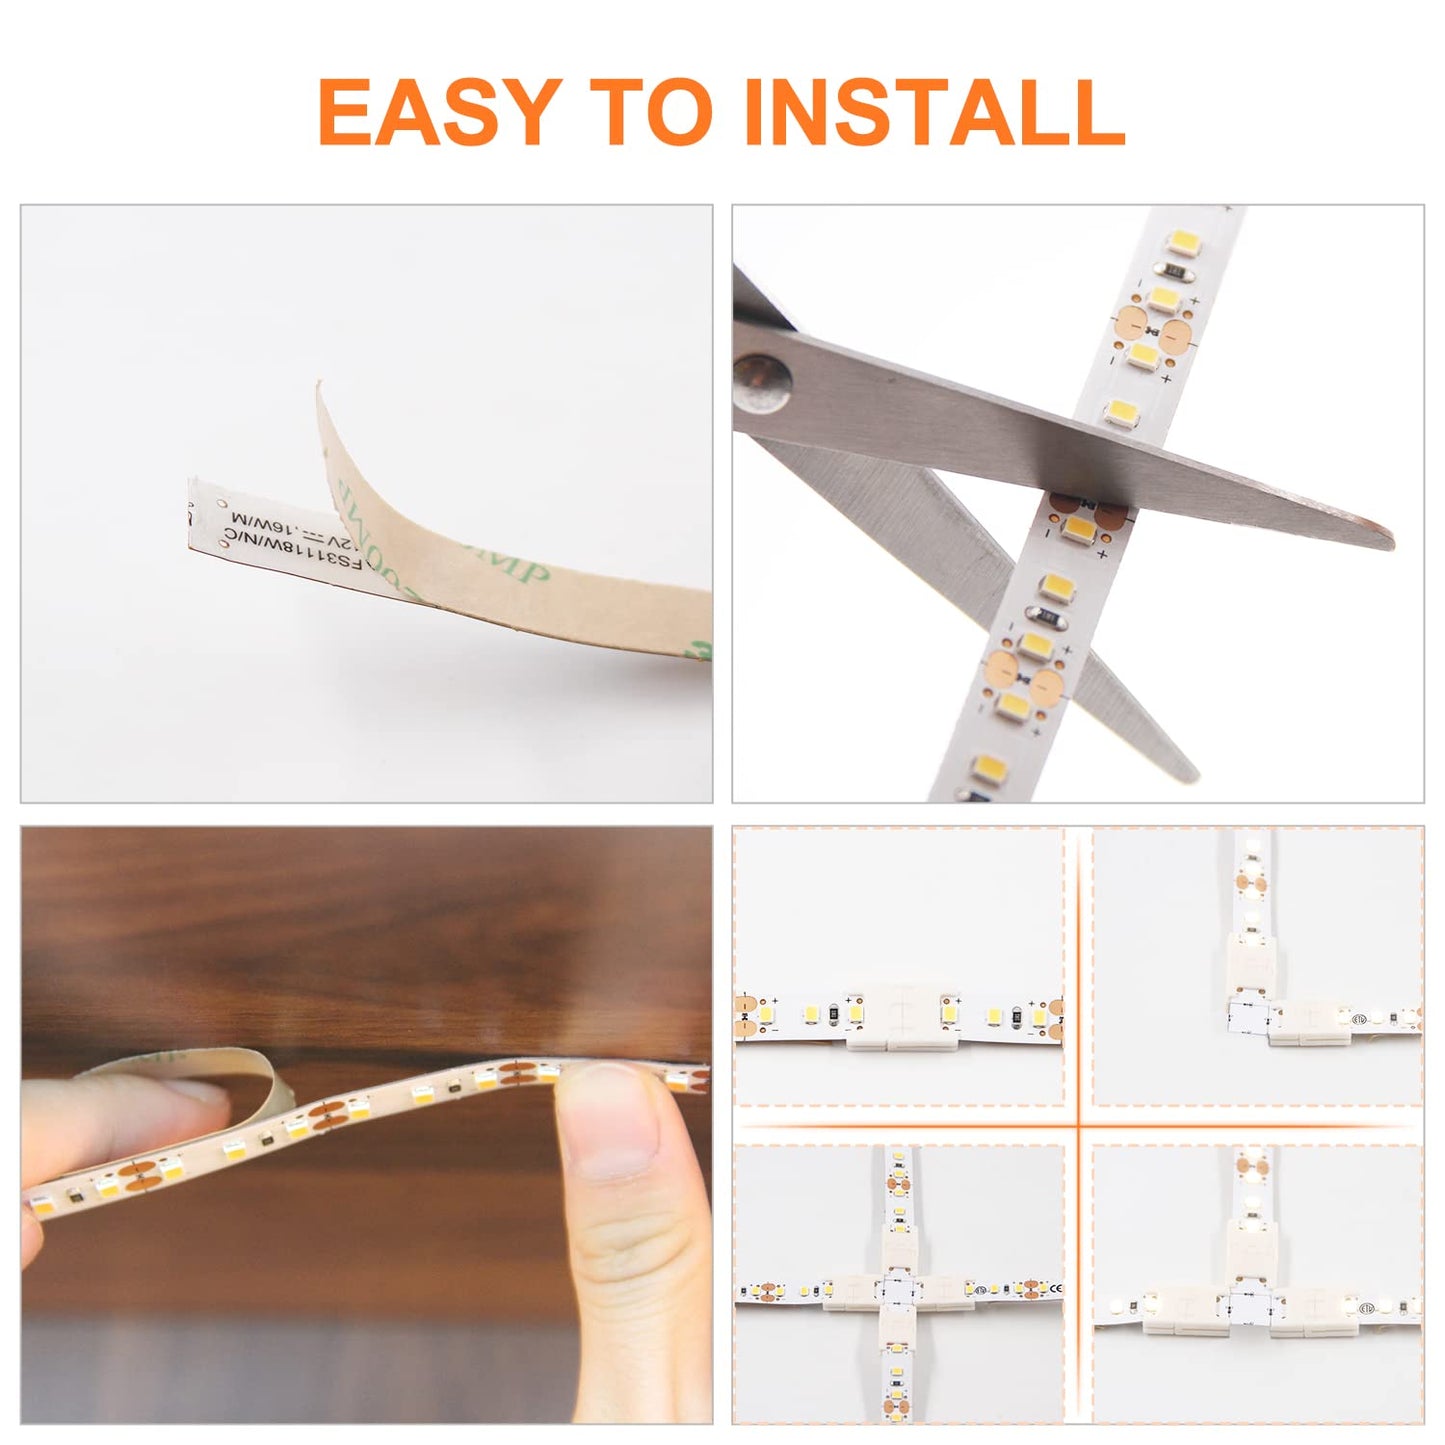 FS31 LED Strip Lights Warm White 120LEDs/m 1000Lm/M 9.6W/M CRI 90+ LED Tape Light 12V 2835 Cuttable Connectable Dimmable LED Strips for Indoor Under Cabinet ETL-Listed,No Driver (3000k, White)